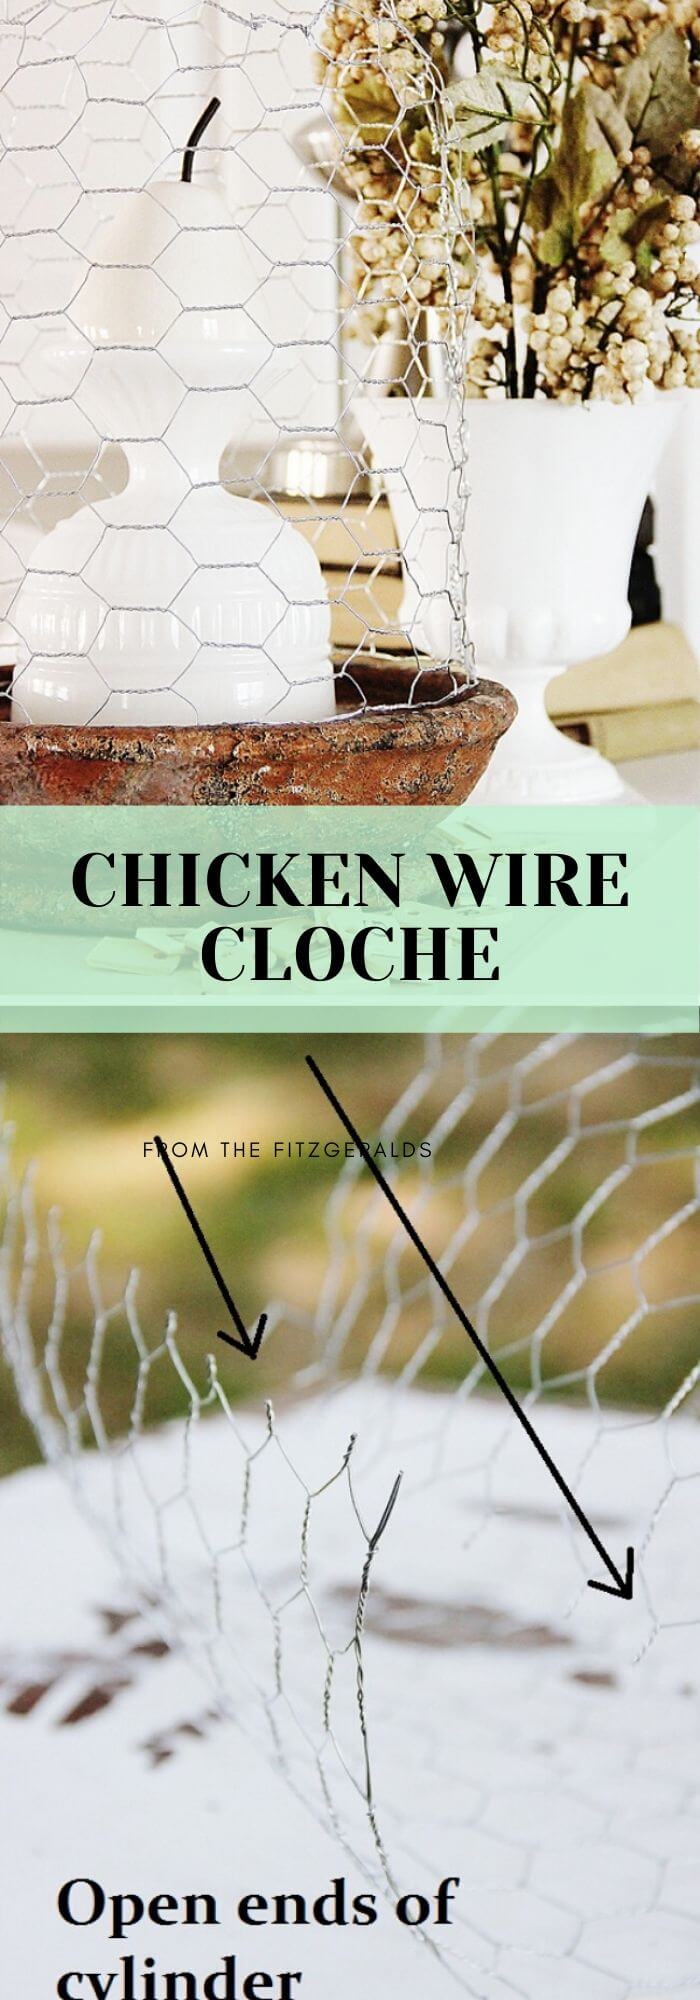 3 chicken wire projects